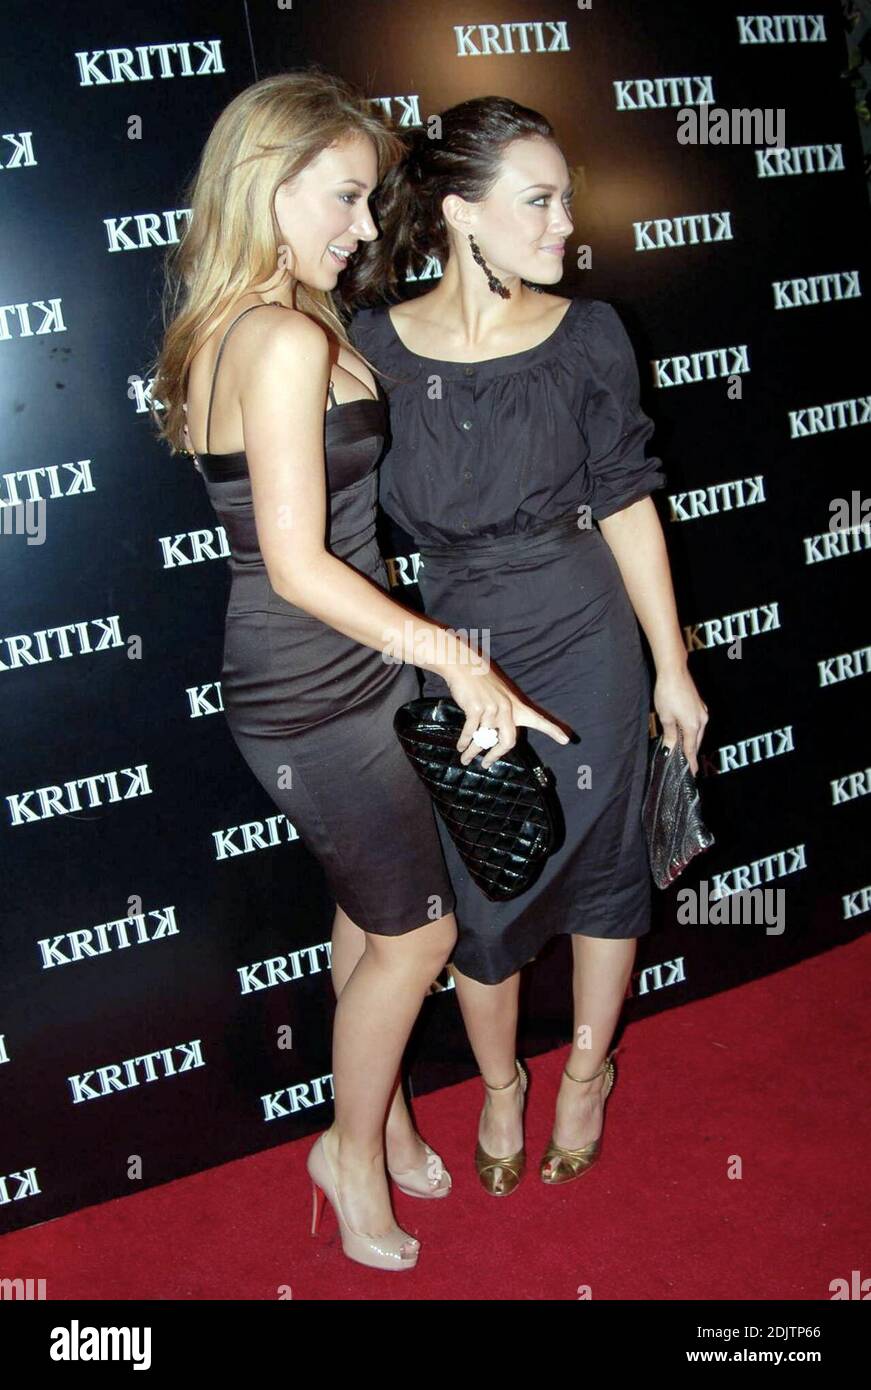 Haylie Duff and Hilary Duff attend publicist to the stars Jonathan Cheban's clothing line launch KRITIK at Casa Casuarina, Miami Beach 12/30/06 Stock Photo